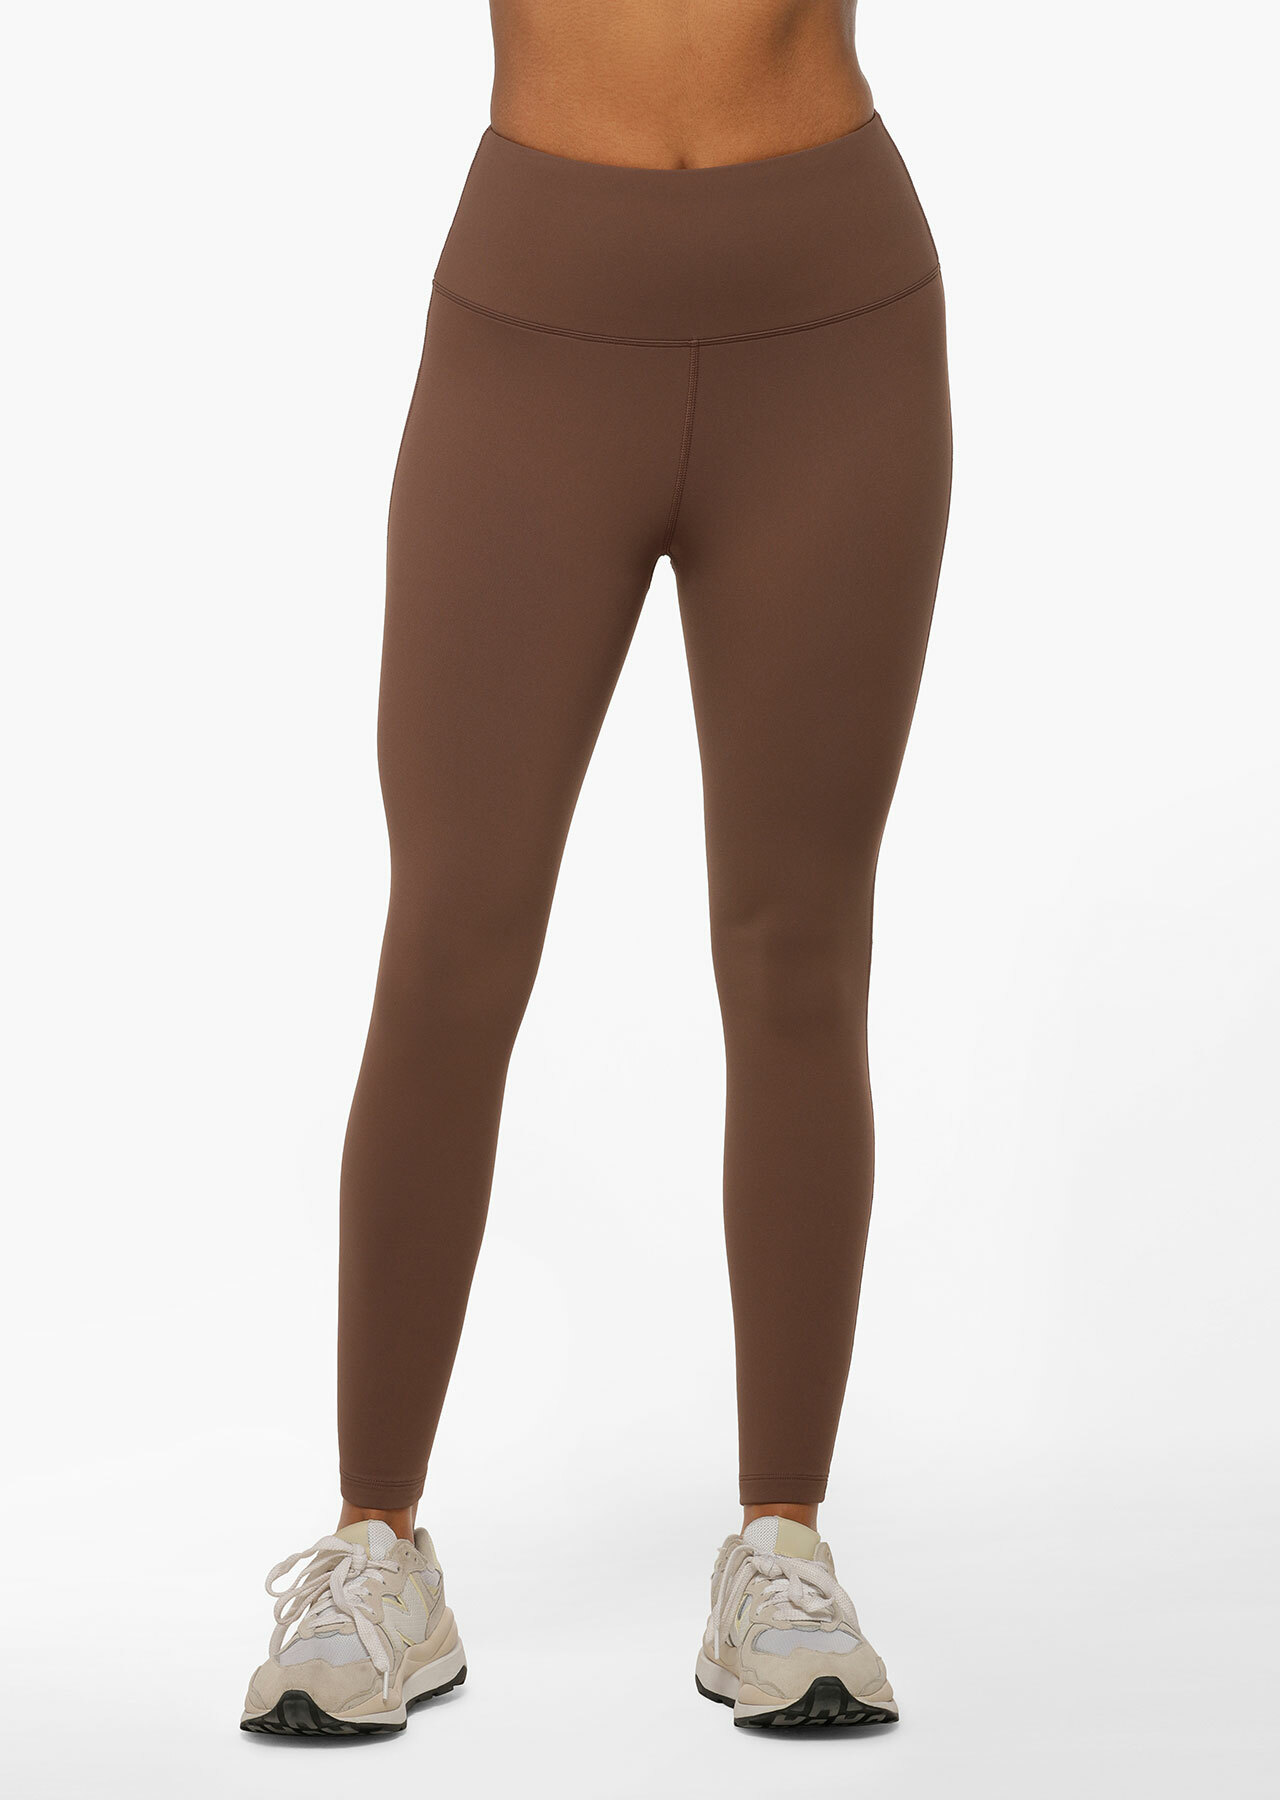 Lotus No Chafe 3/4 Leggings by Lorna Jane Online, THE ICONIC